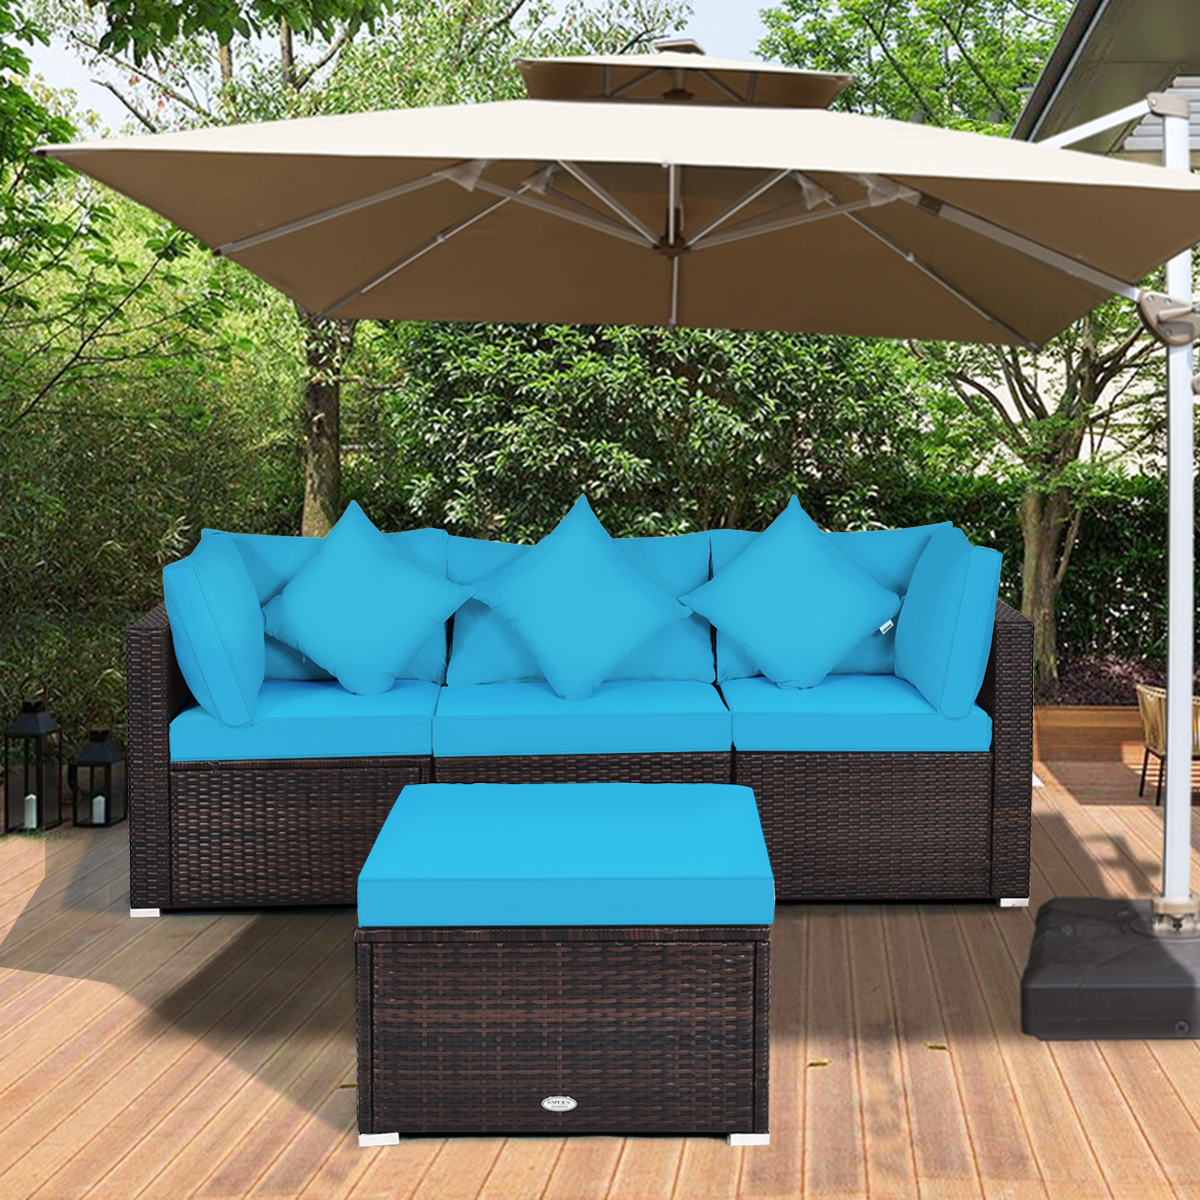 Turquoise_4_PCS_Patio_Rattan_Conversation_Set_with_Coffee_Table-7.jpg